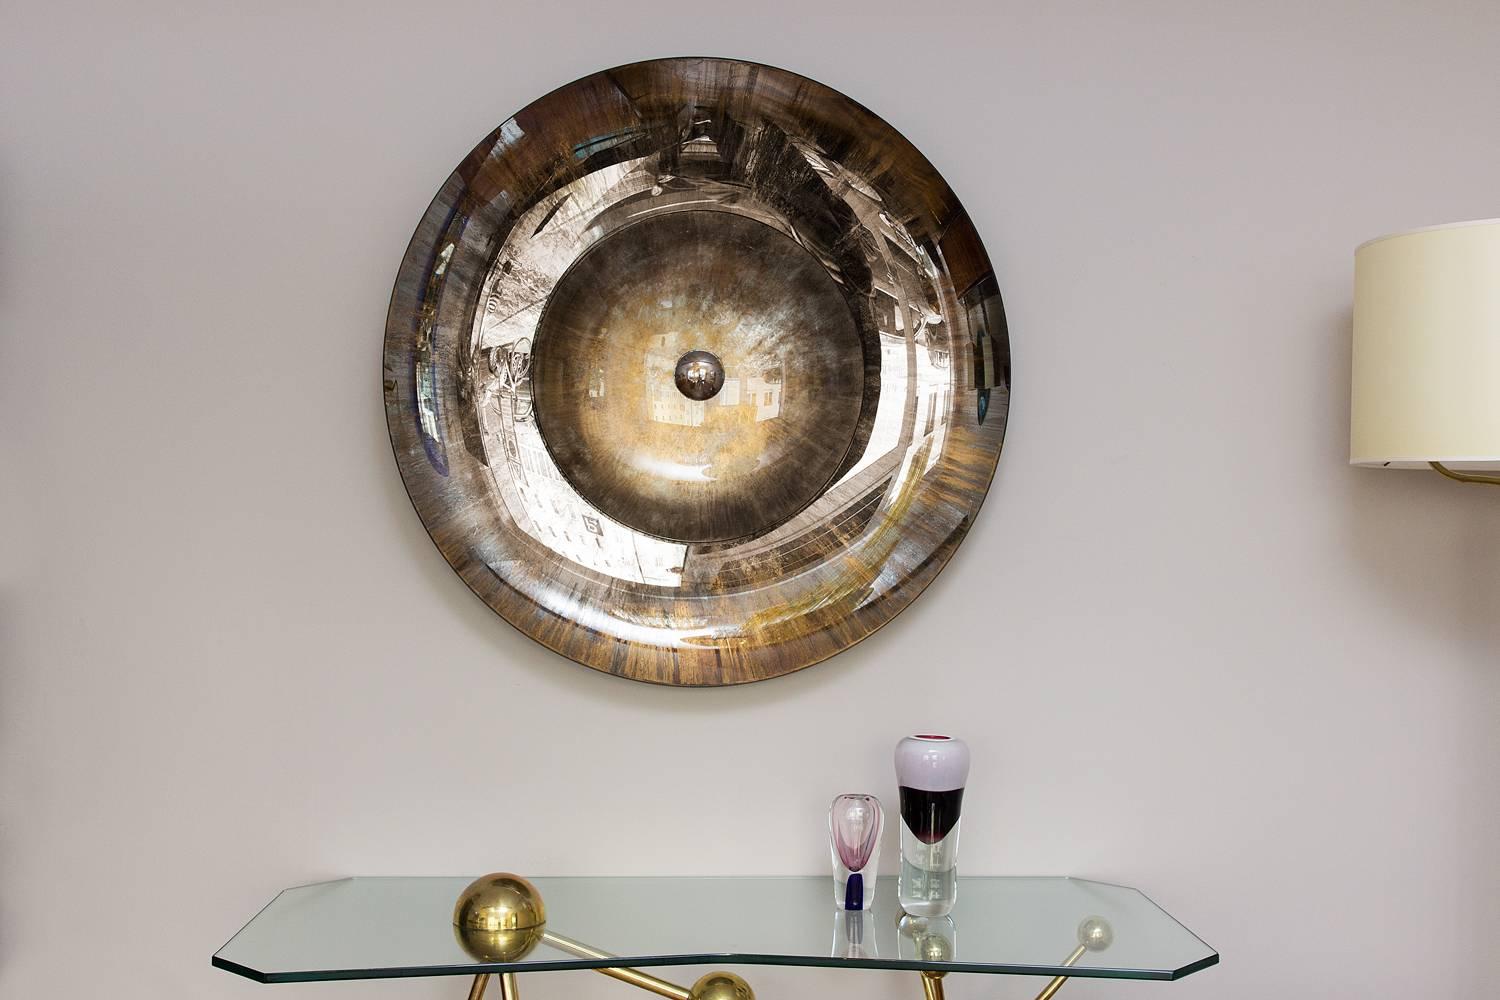 Amazing mirror object by Christophe Gaignon, France in 2015, unique piece, three concave and convex glass bowls, gold/silver/bronze reflections, brass mount, signed on the backside.
Lagerst mirror diameter 109 / 58 / 9 cm.
 
Dimensions: Diameter